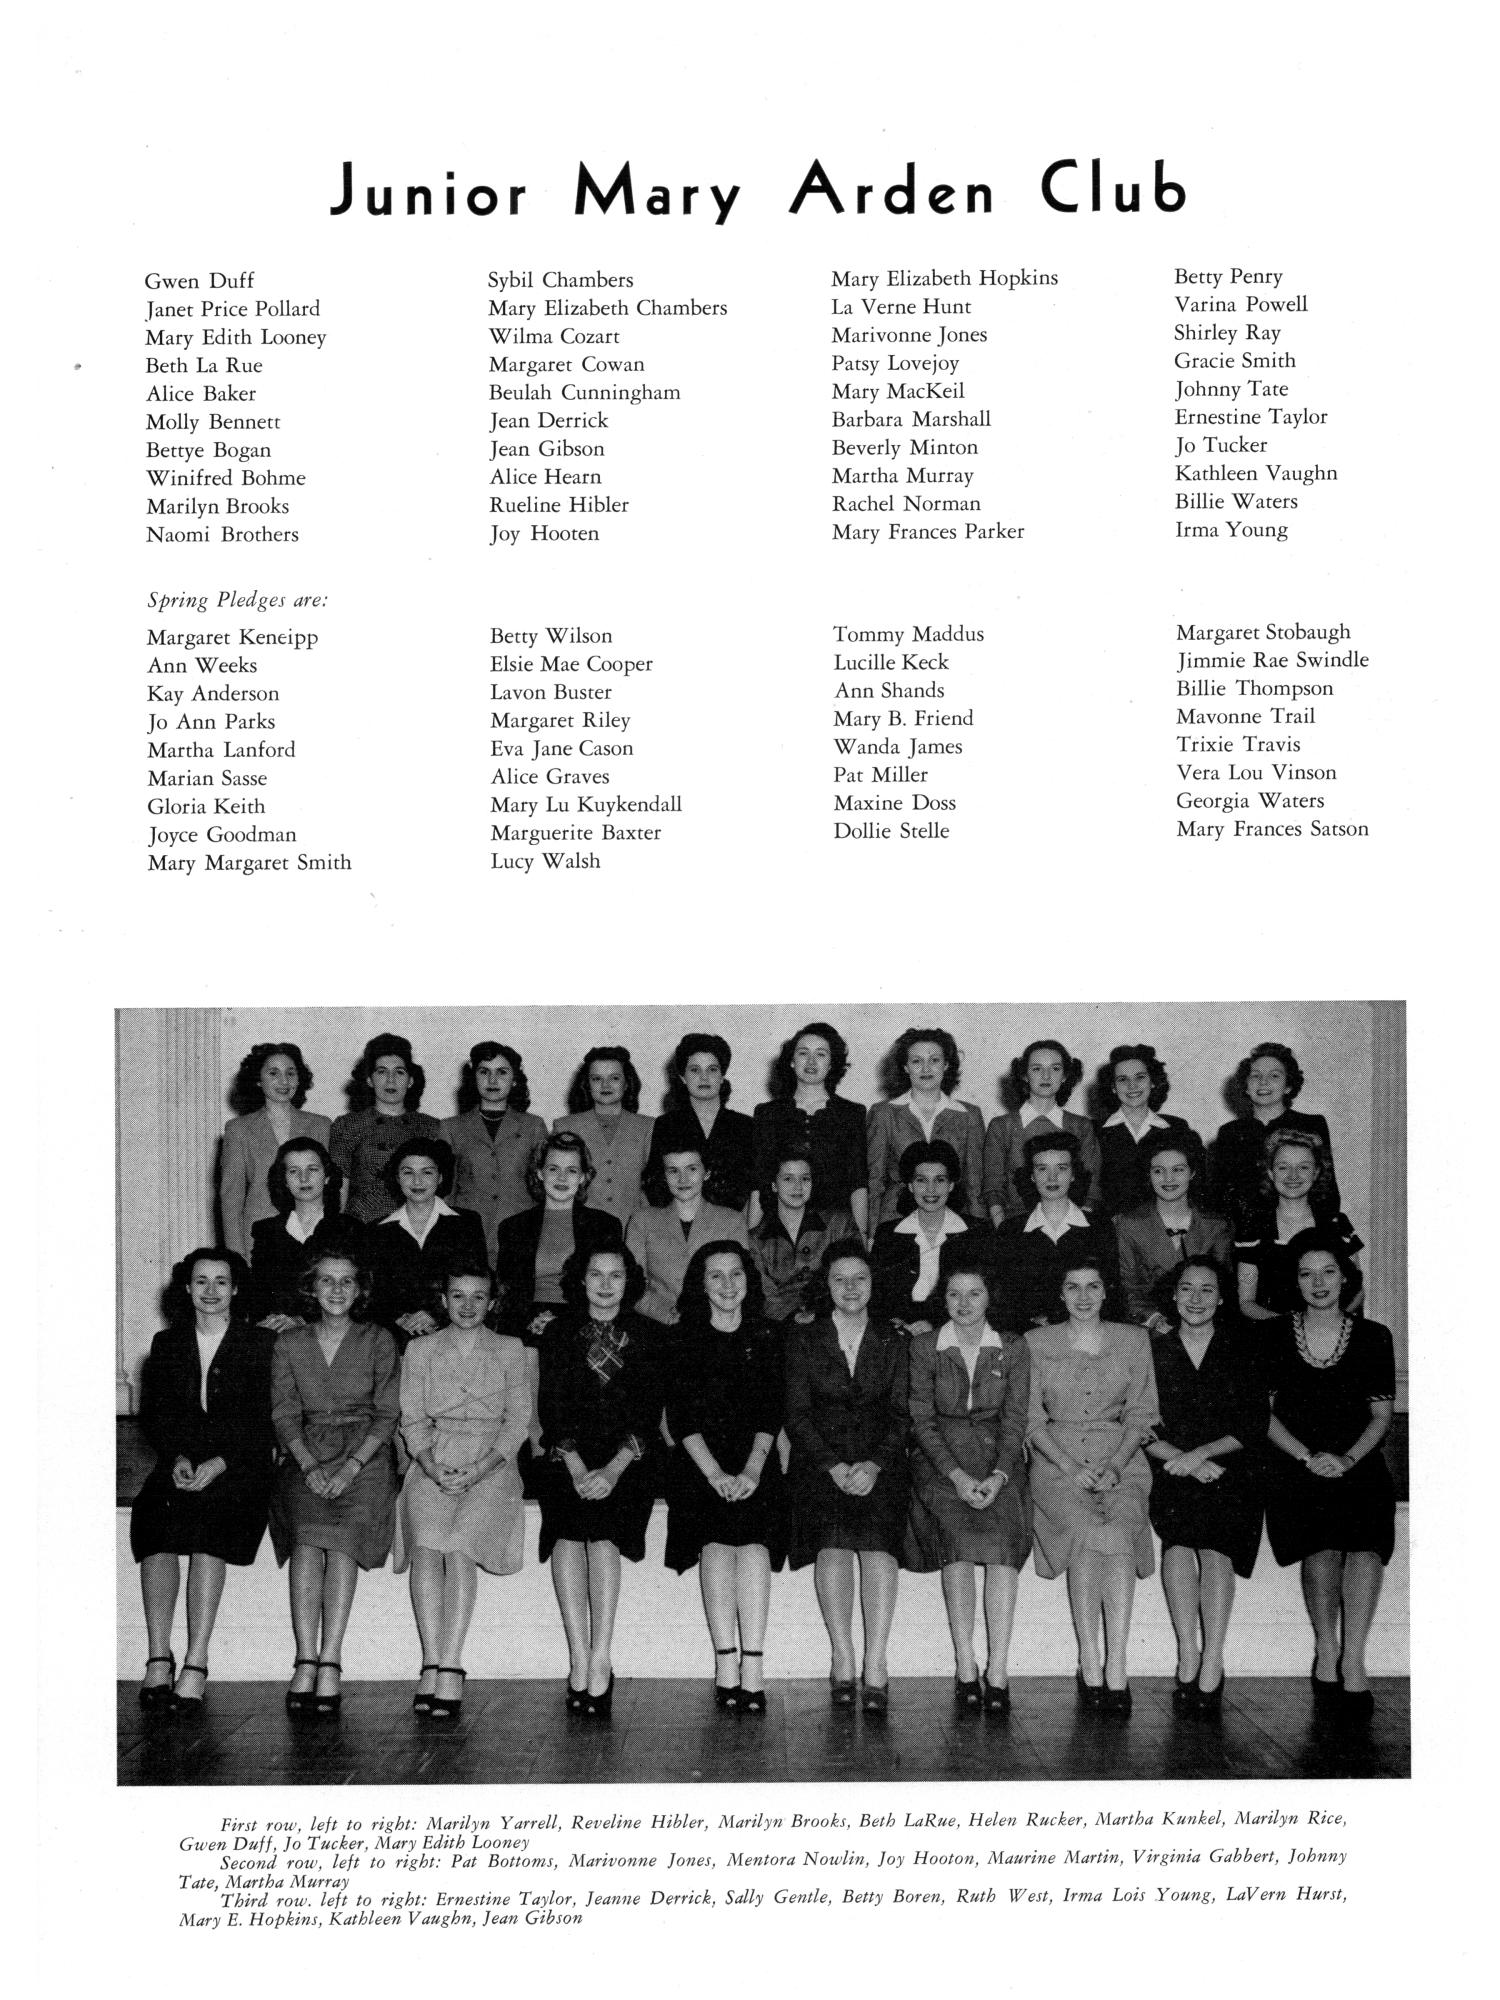 The Yucca, Yearbook of North Texas State Teacher's College, 1945 - Page 216  - UNT Digital Library